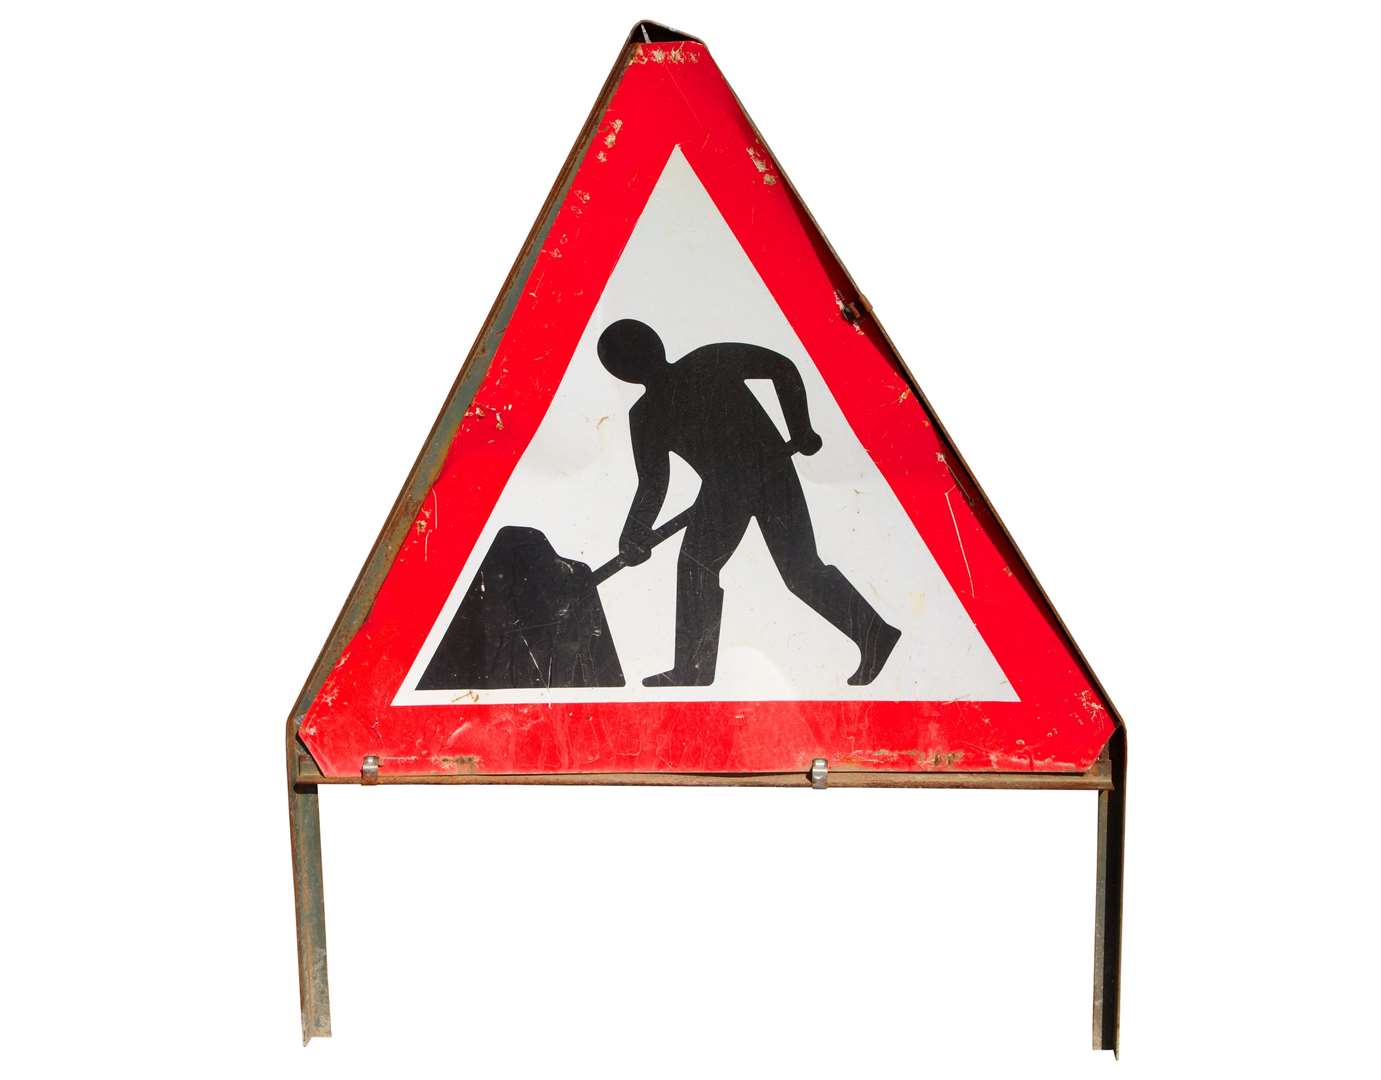 Roadworks are planned at Daviot